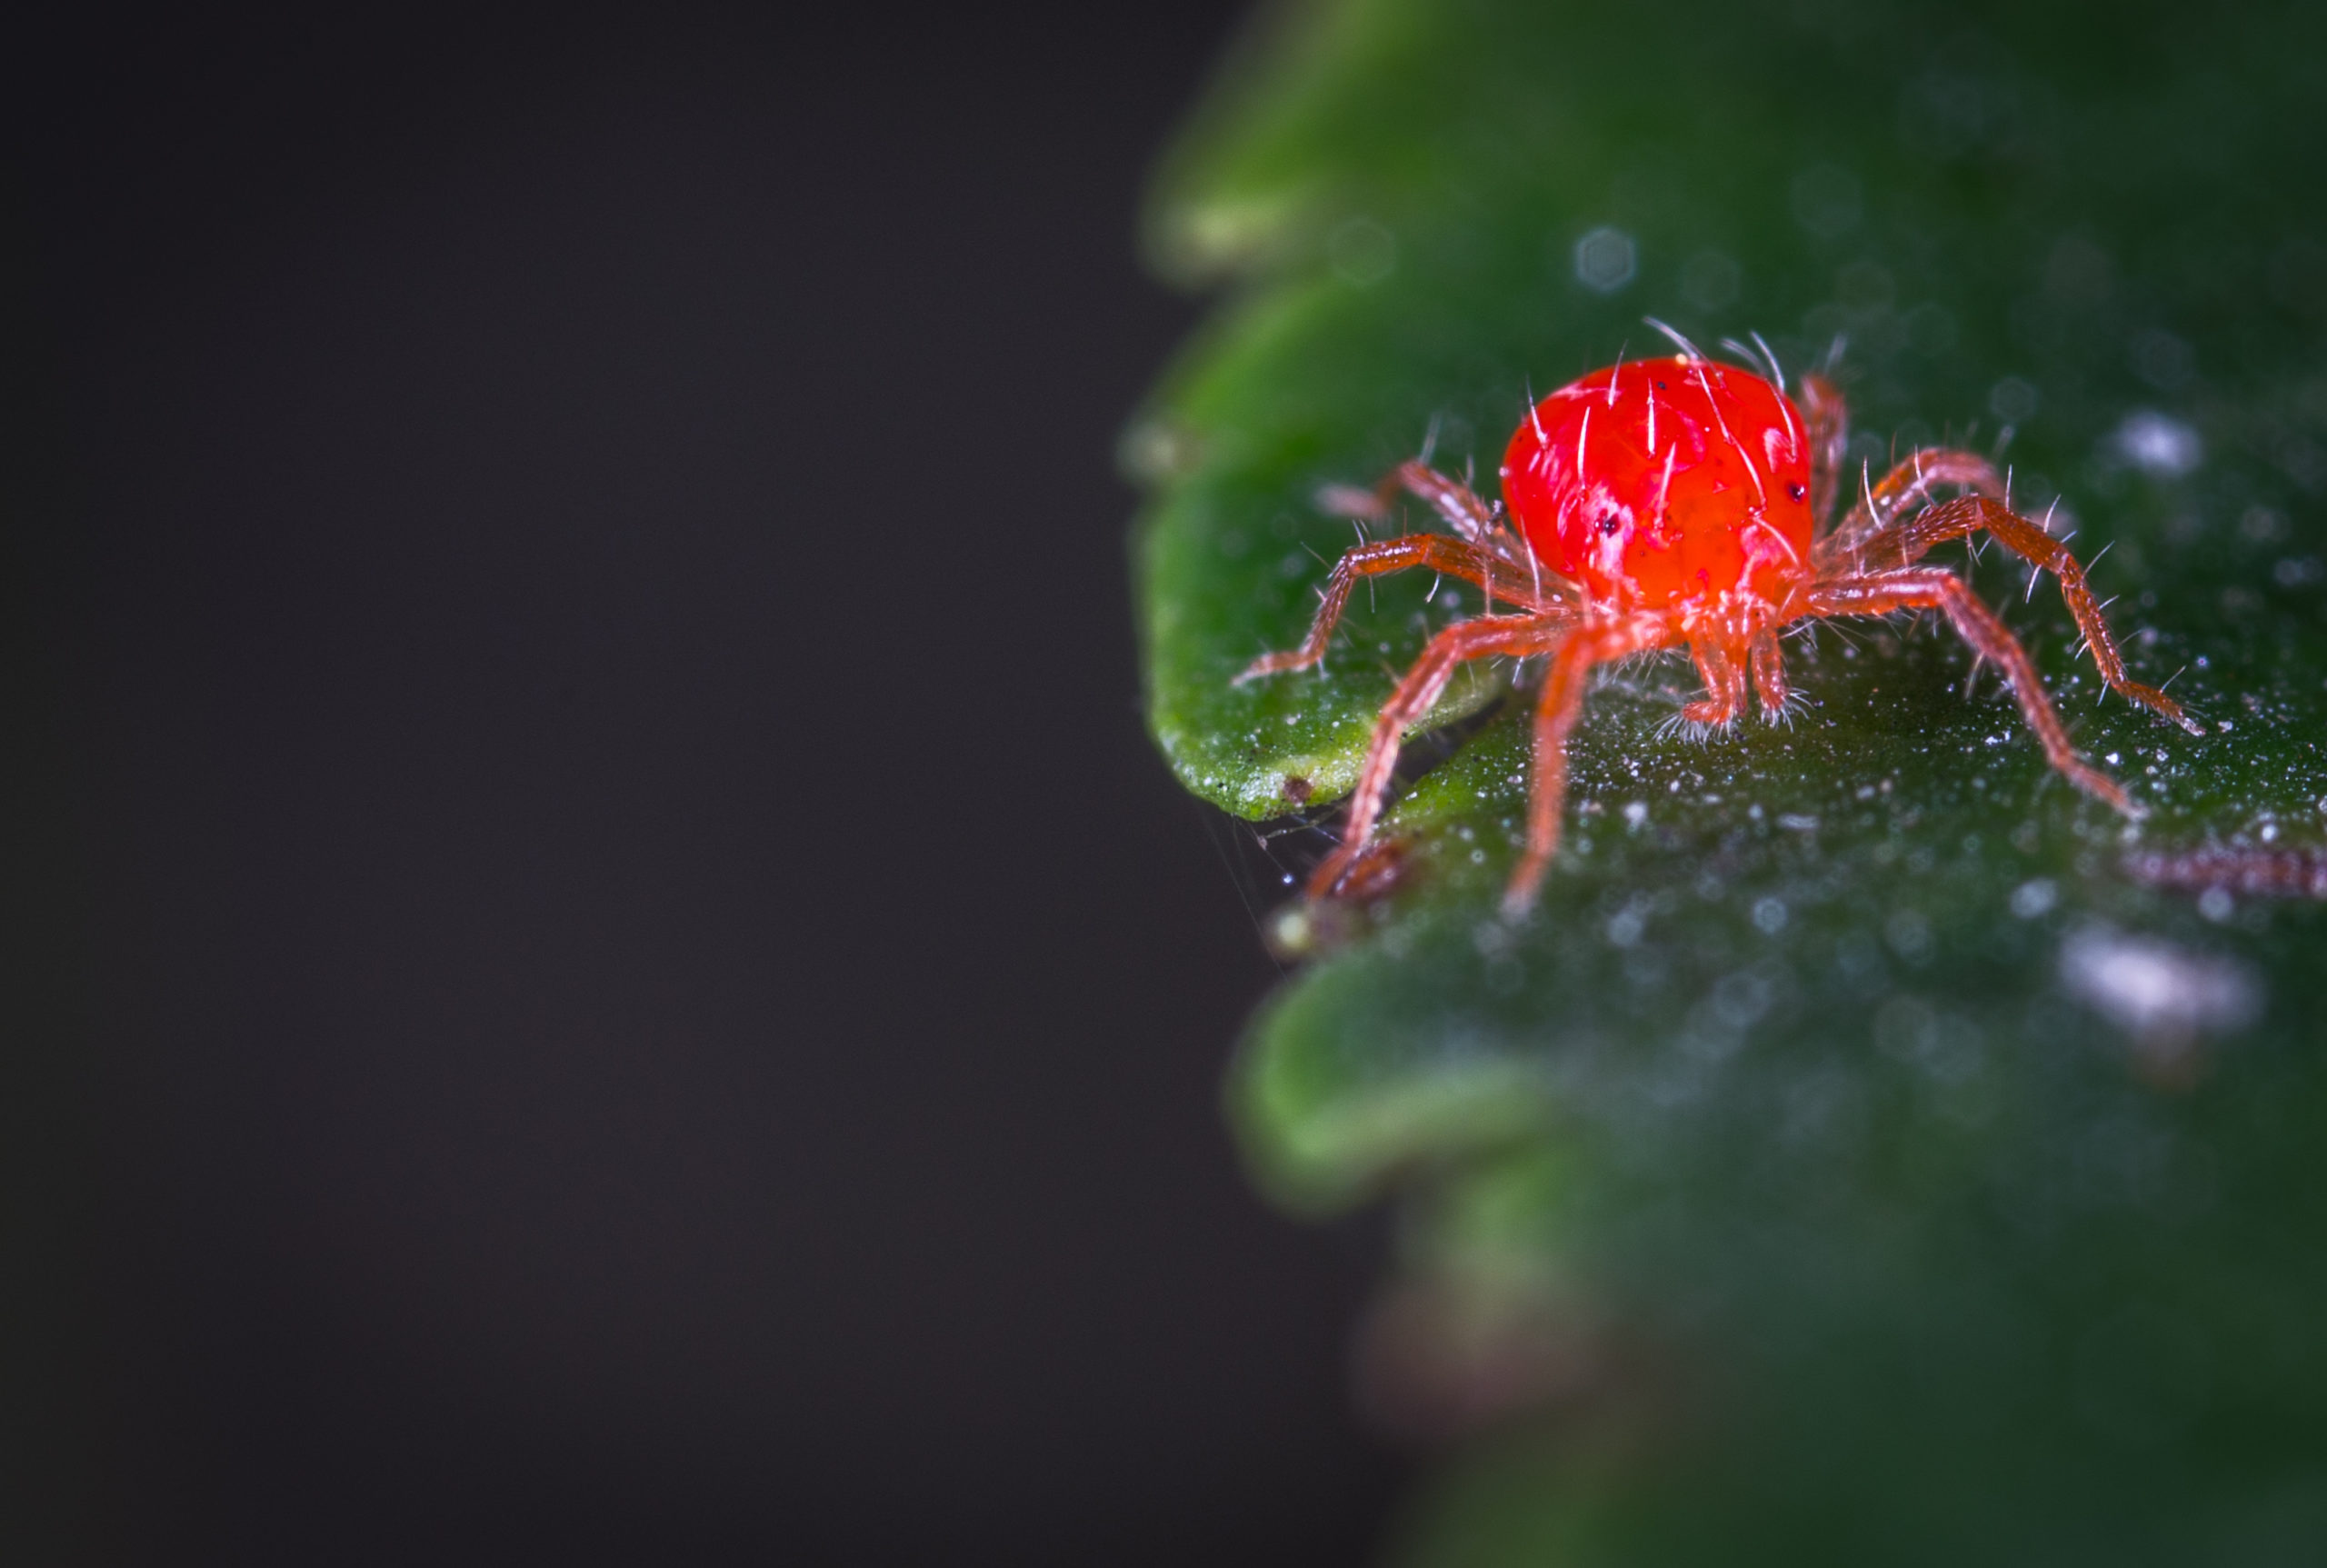 Spartan Animal and Pest Control Launches New Blog on Identifying Spider Infestations and Effective Insect Control Solutions